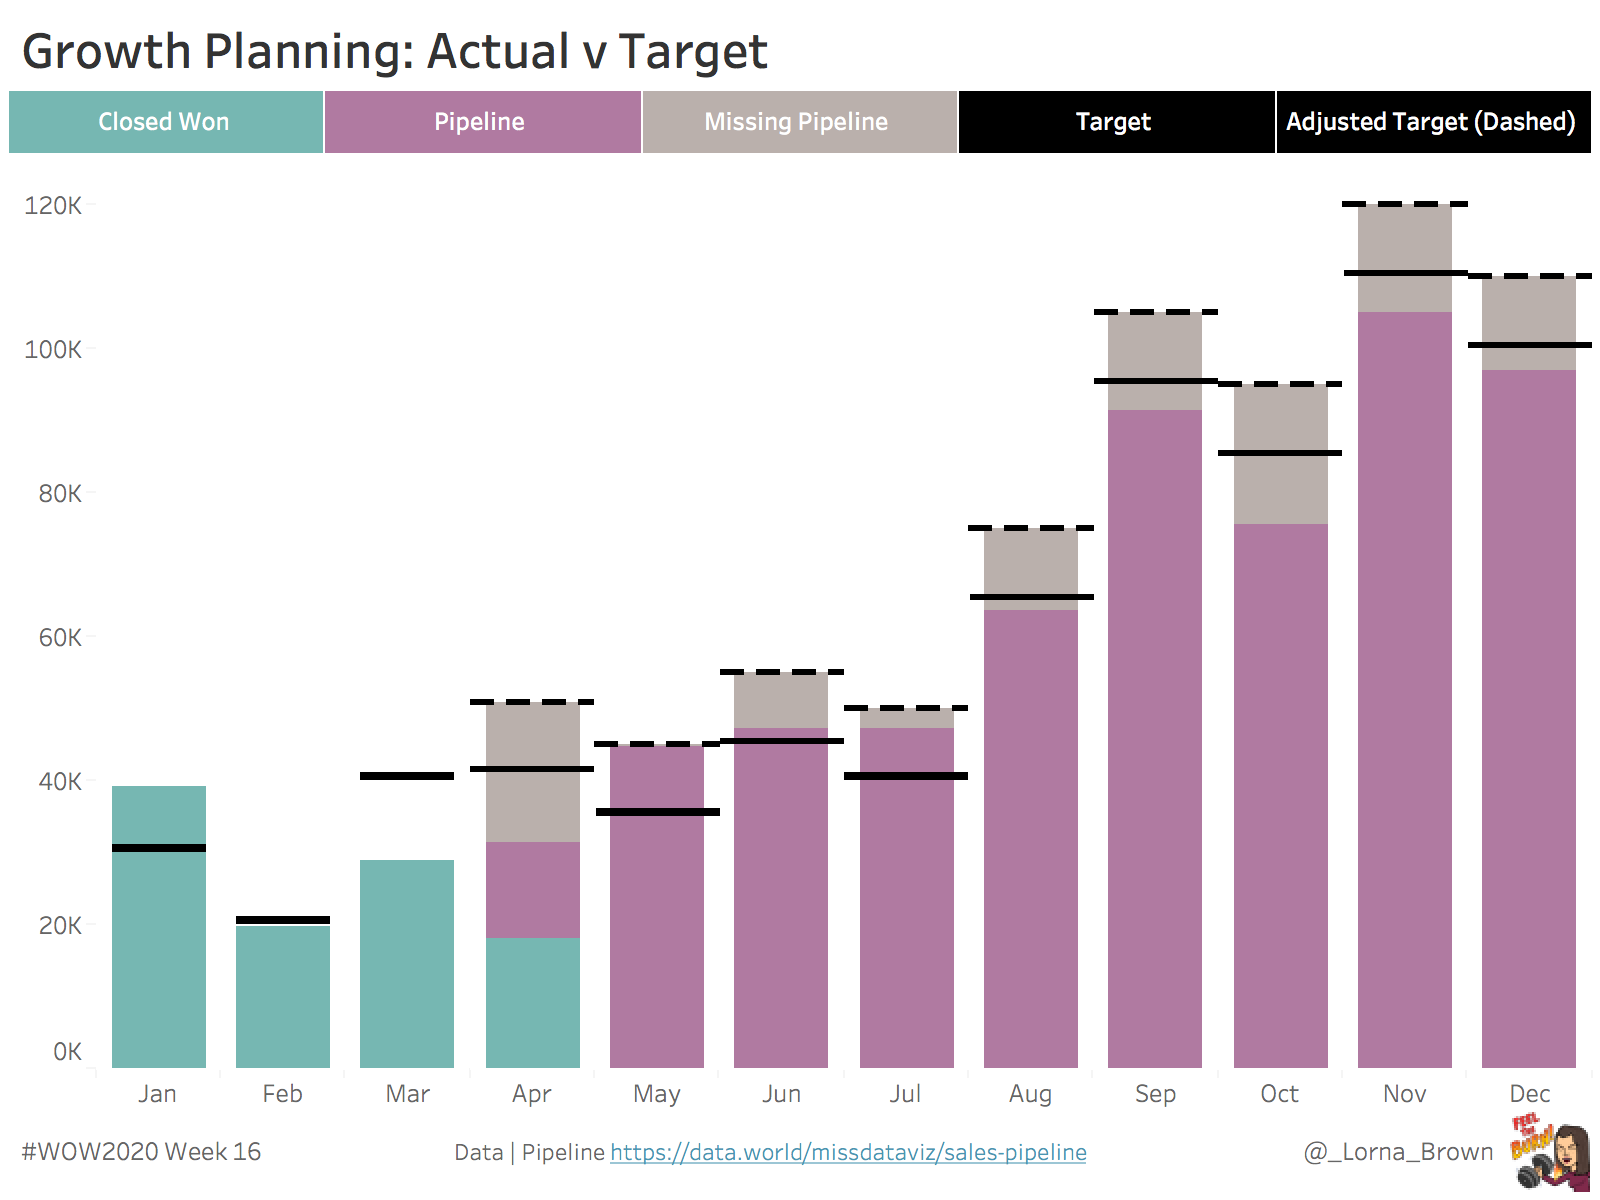 2020-week-16-can-you-show-the-adjusted-target-missing-pipeline